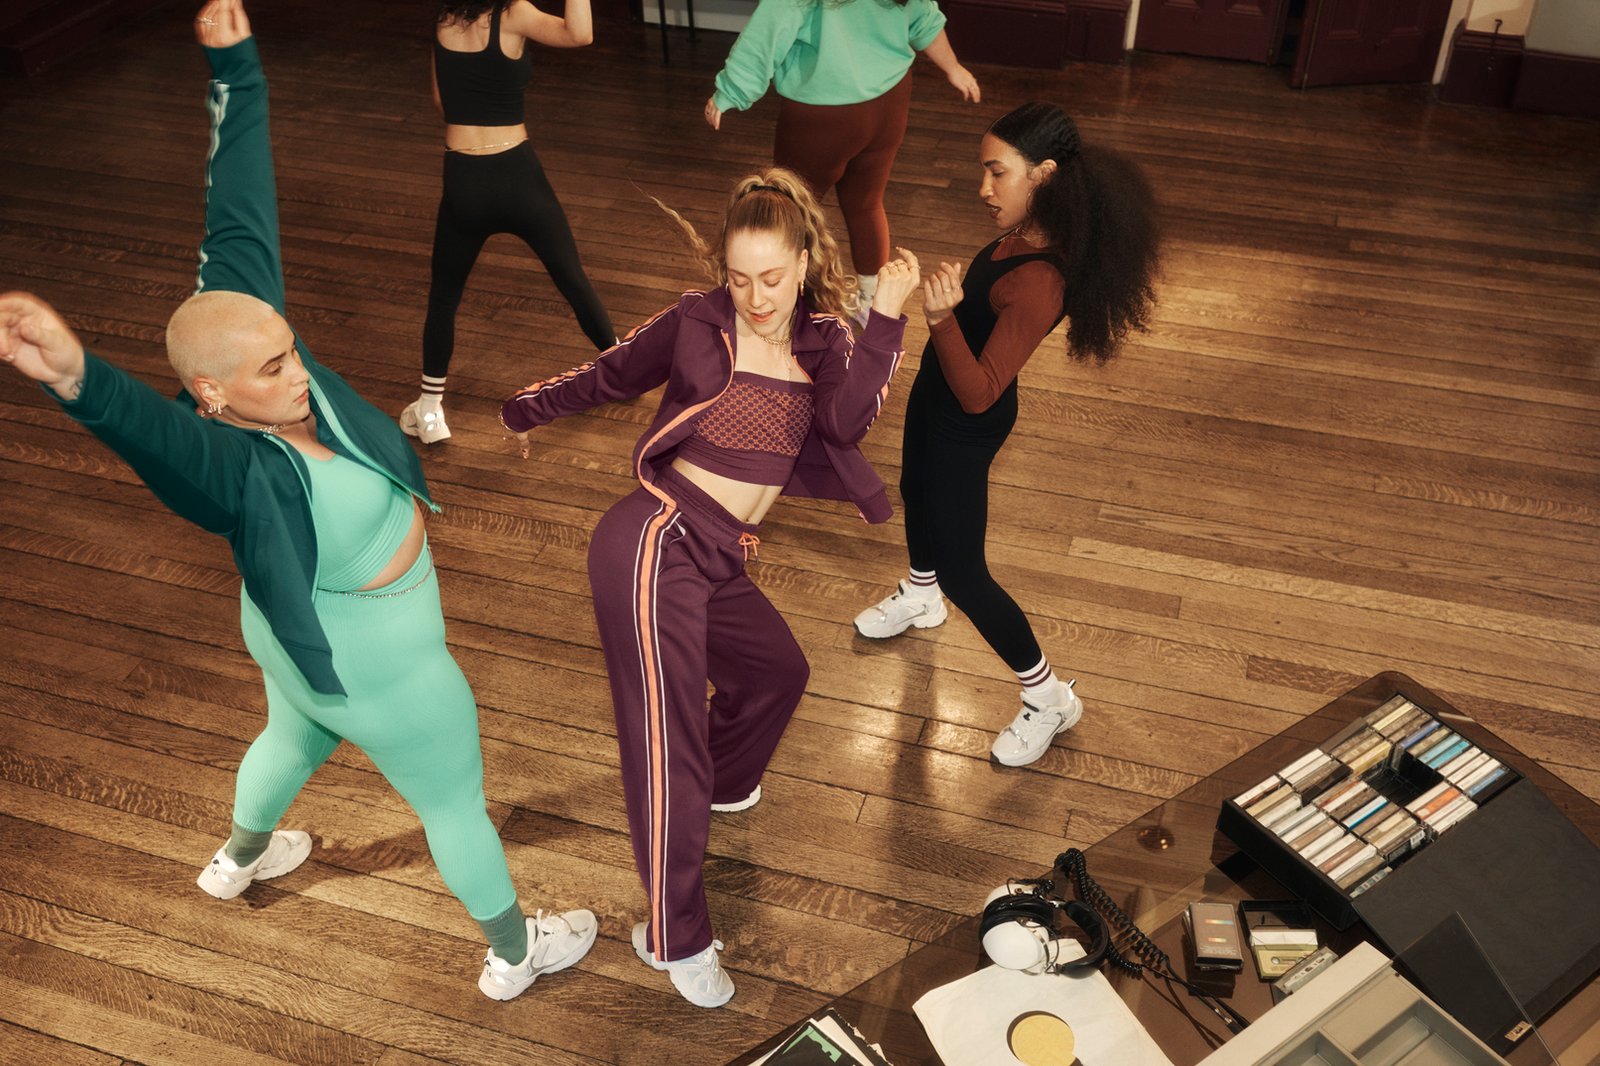 H&M MOVE OPENS THE DANCEFLOOR WITH FAMOUS CHOREOGRAPHER JAQUEL KNIGHT TO LAUNCH THE FIRST DANCE COLLECTION